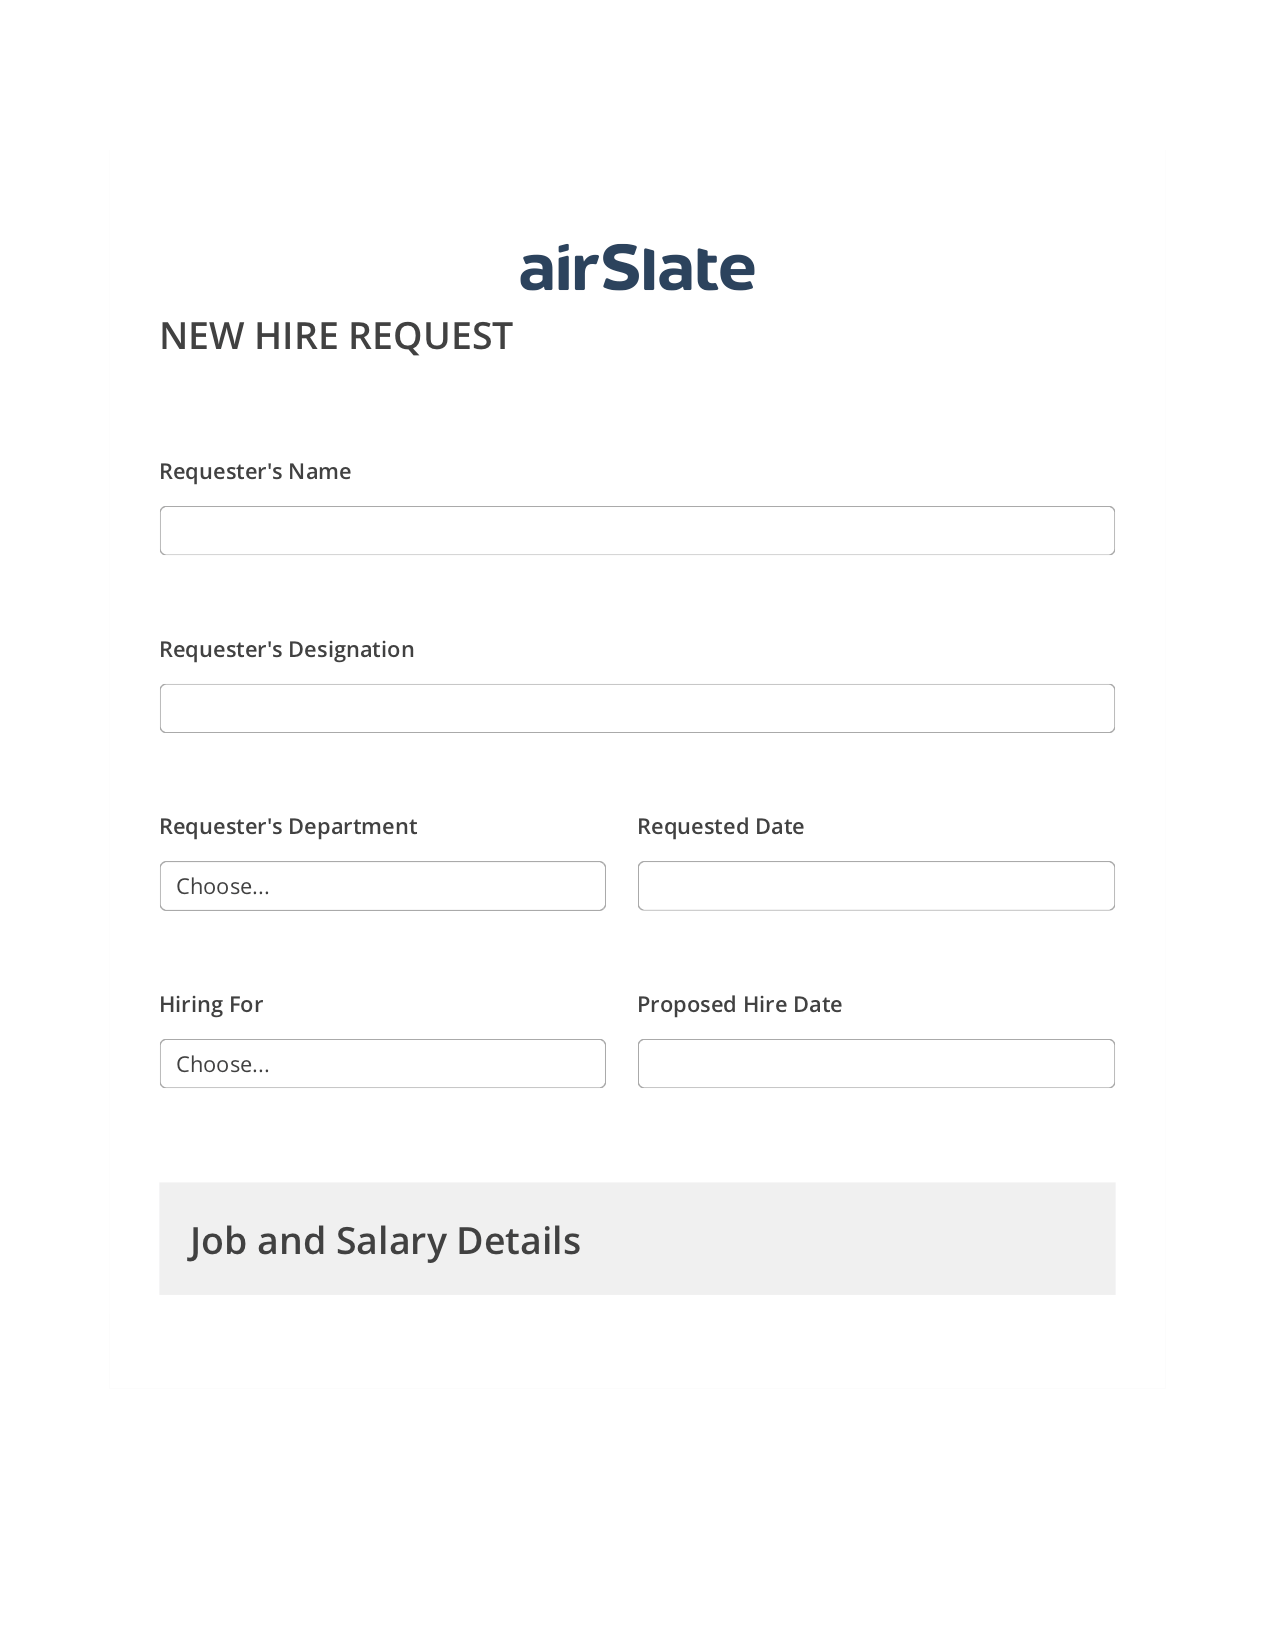 Multirole Hiring Request Workflow Pre-fill Dropdowns from Google Sheet Bot, Update Audit Trail Bot, Export to Smartsheet